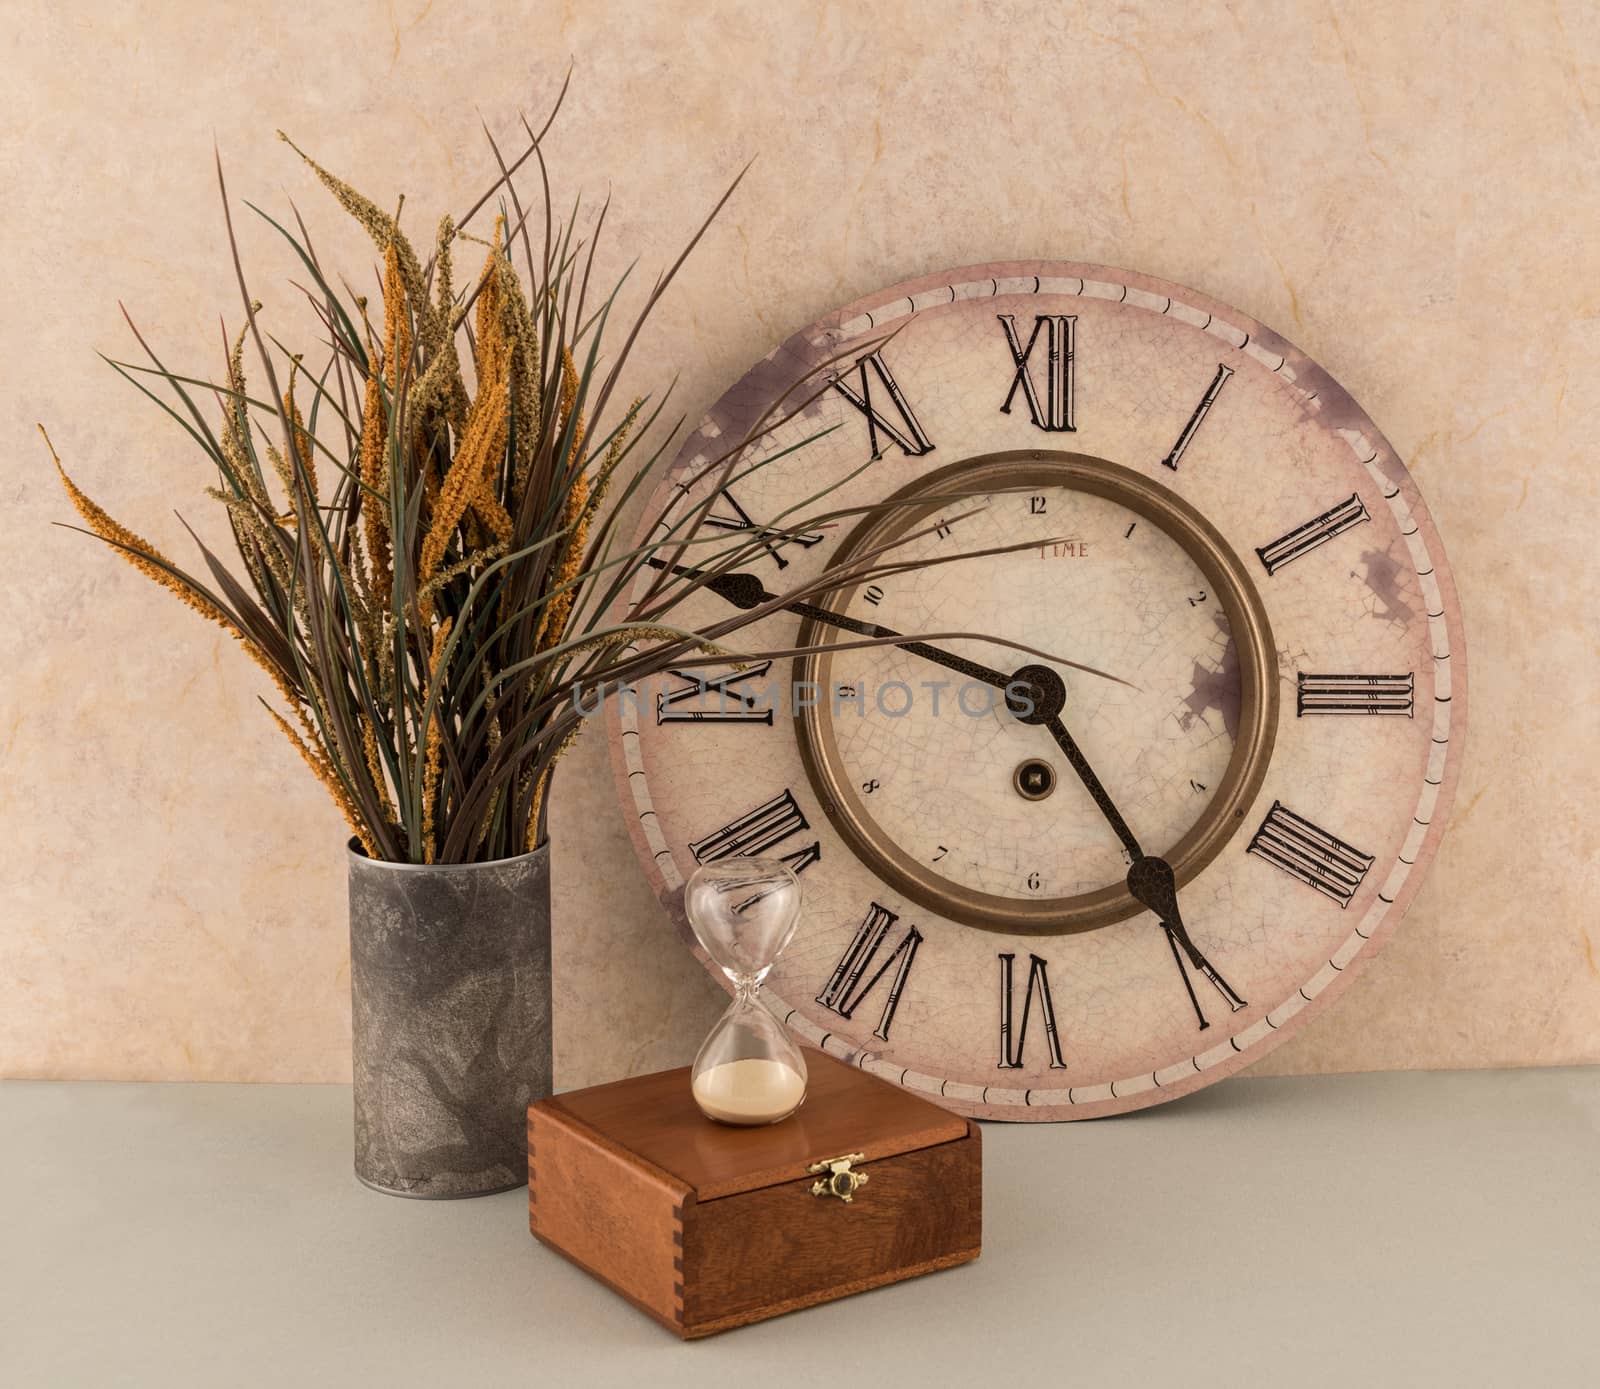 "Time" theme with wall clock and hourglass